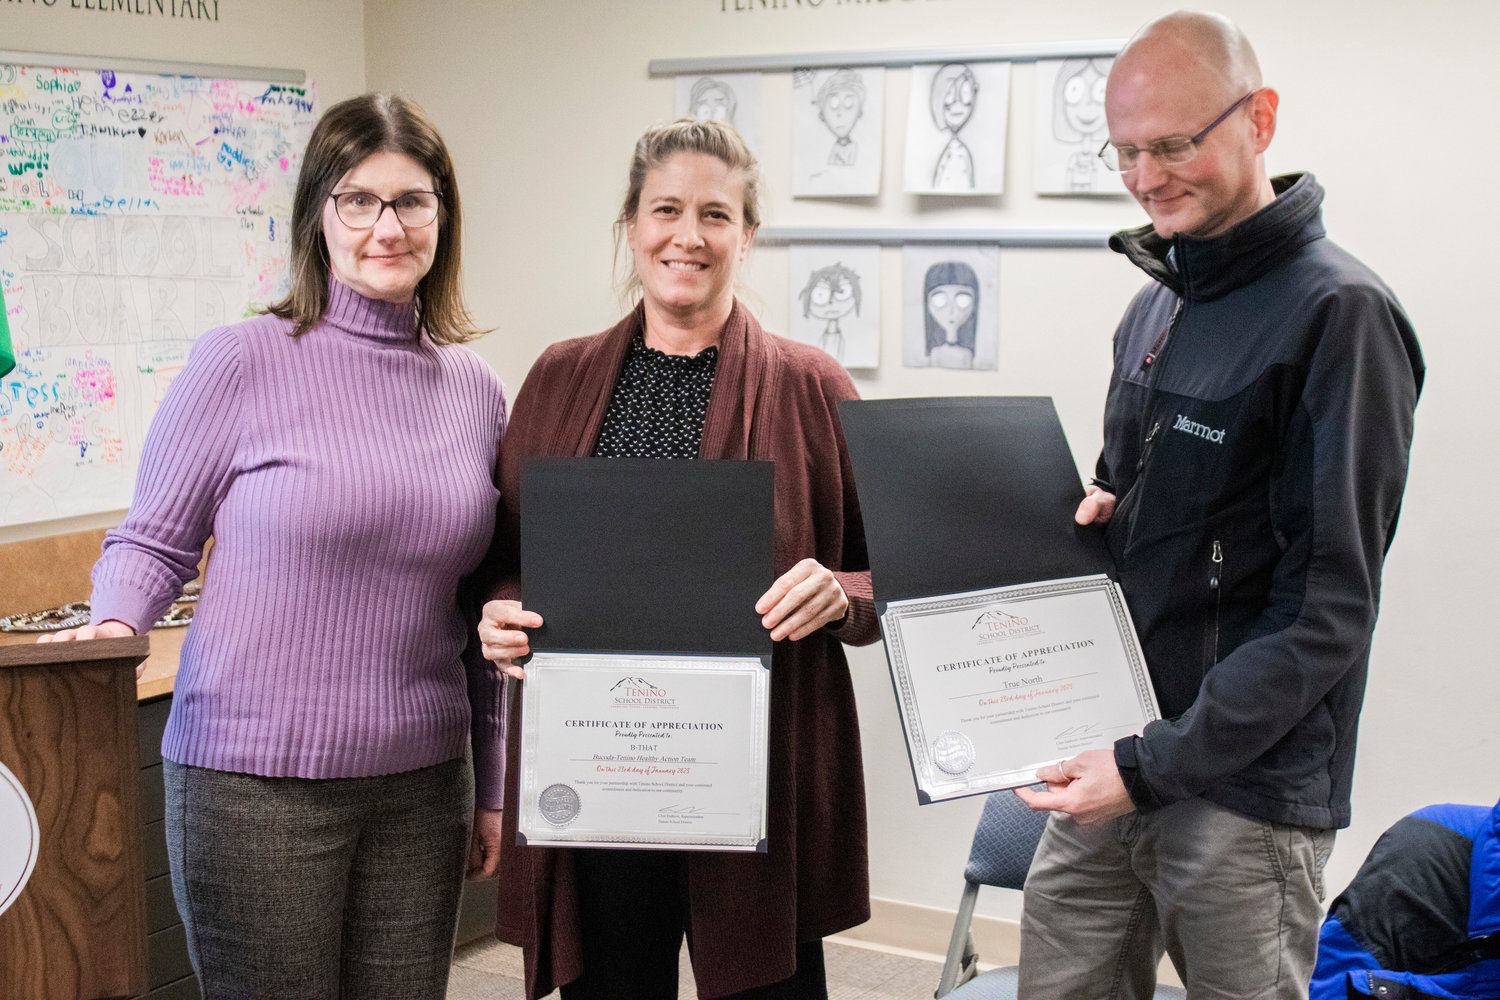 The Bucoda-Tenino Healthy Action Team and True North received “Certificates of Appreciation” on Monday.